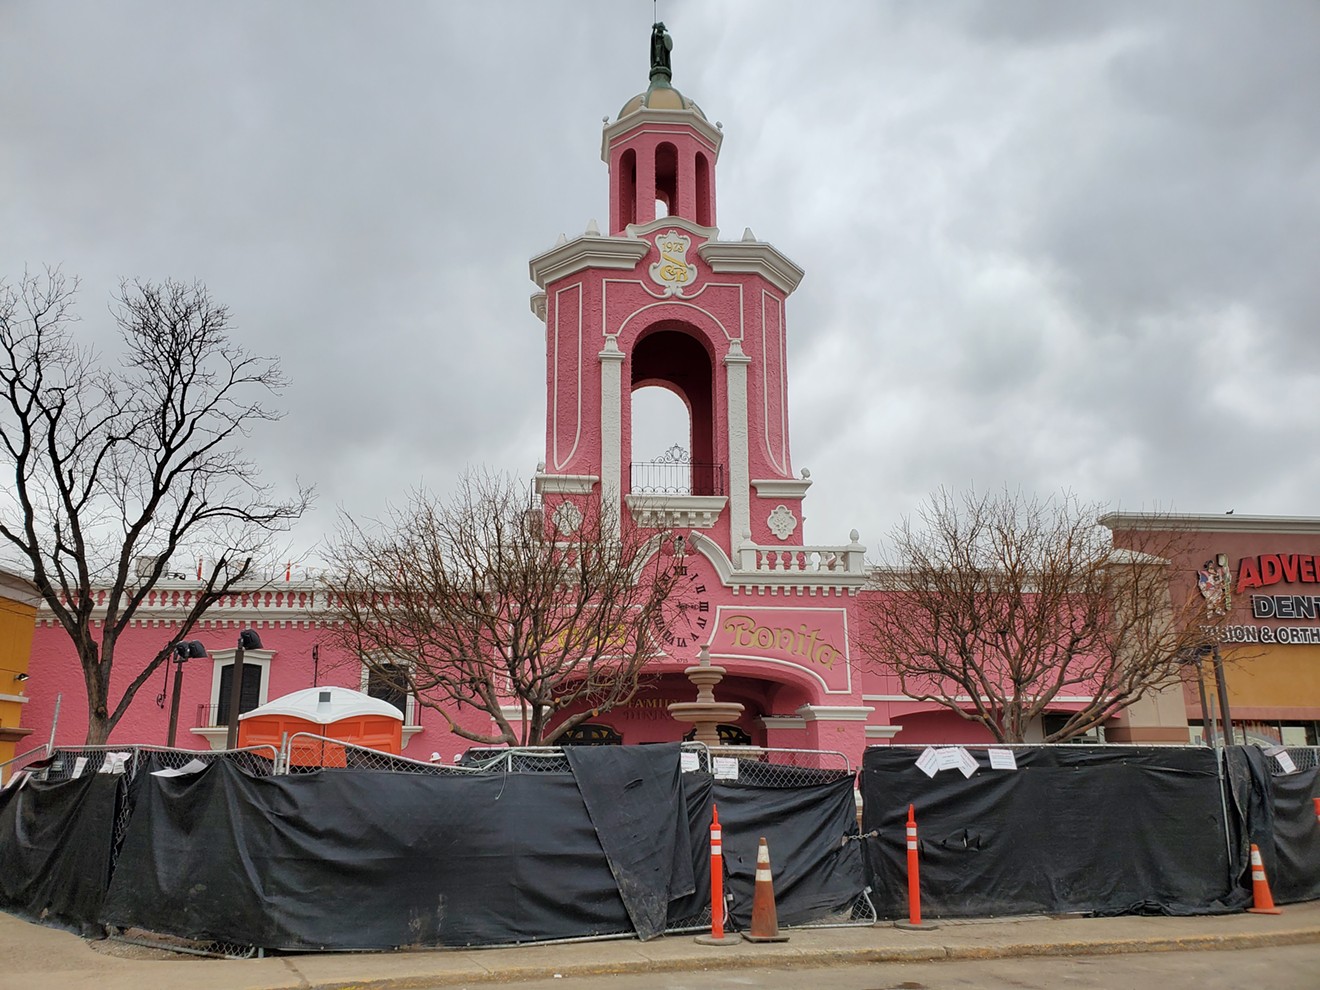 How long will the line be when Casa Bonita reopens this May?